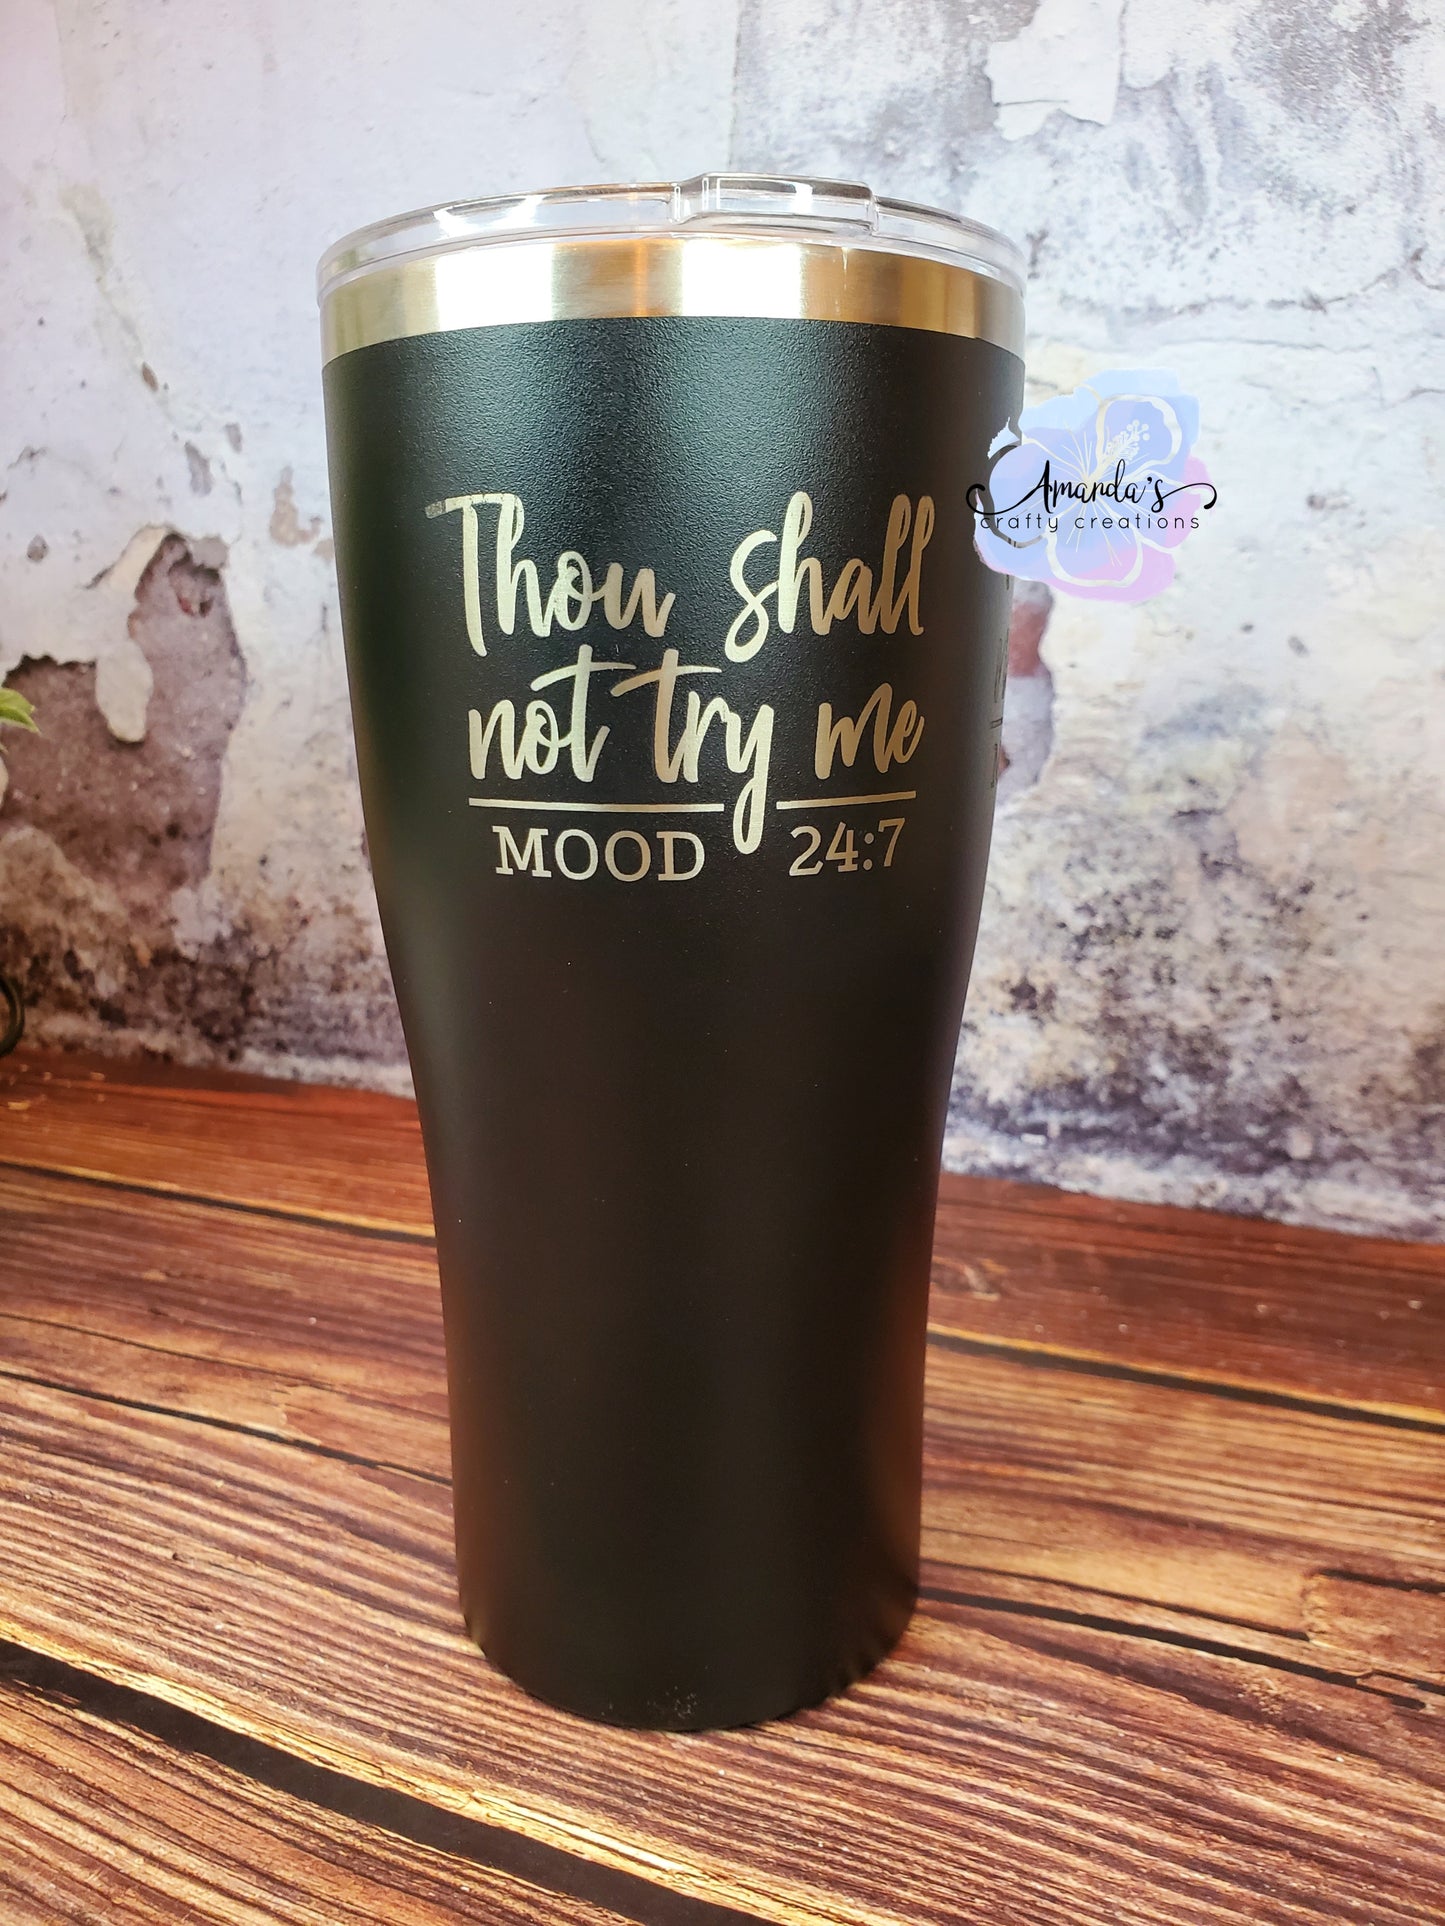 Thou shall not try me Mood 24:7 tumbler